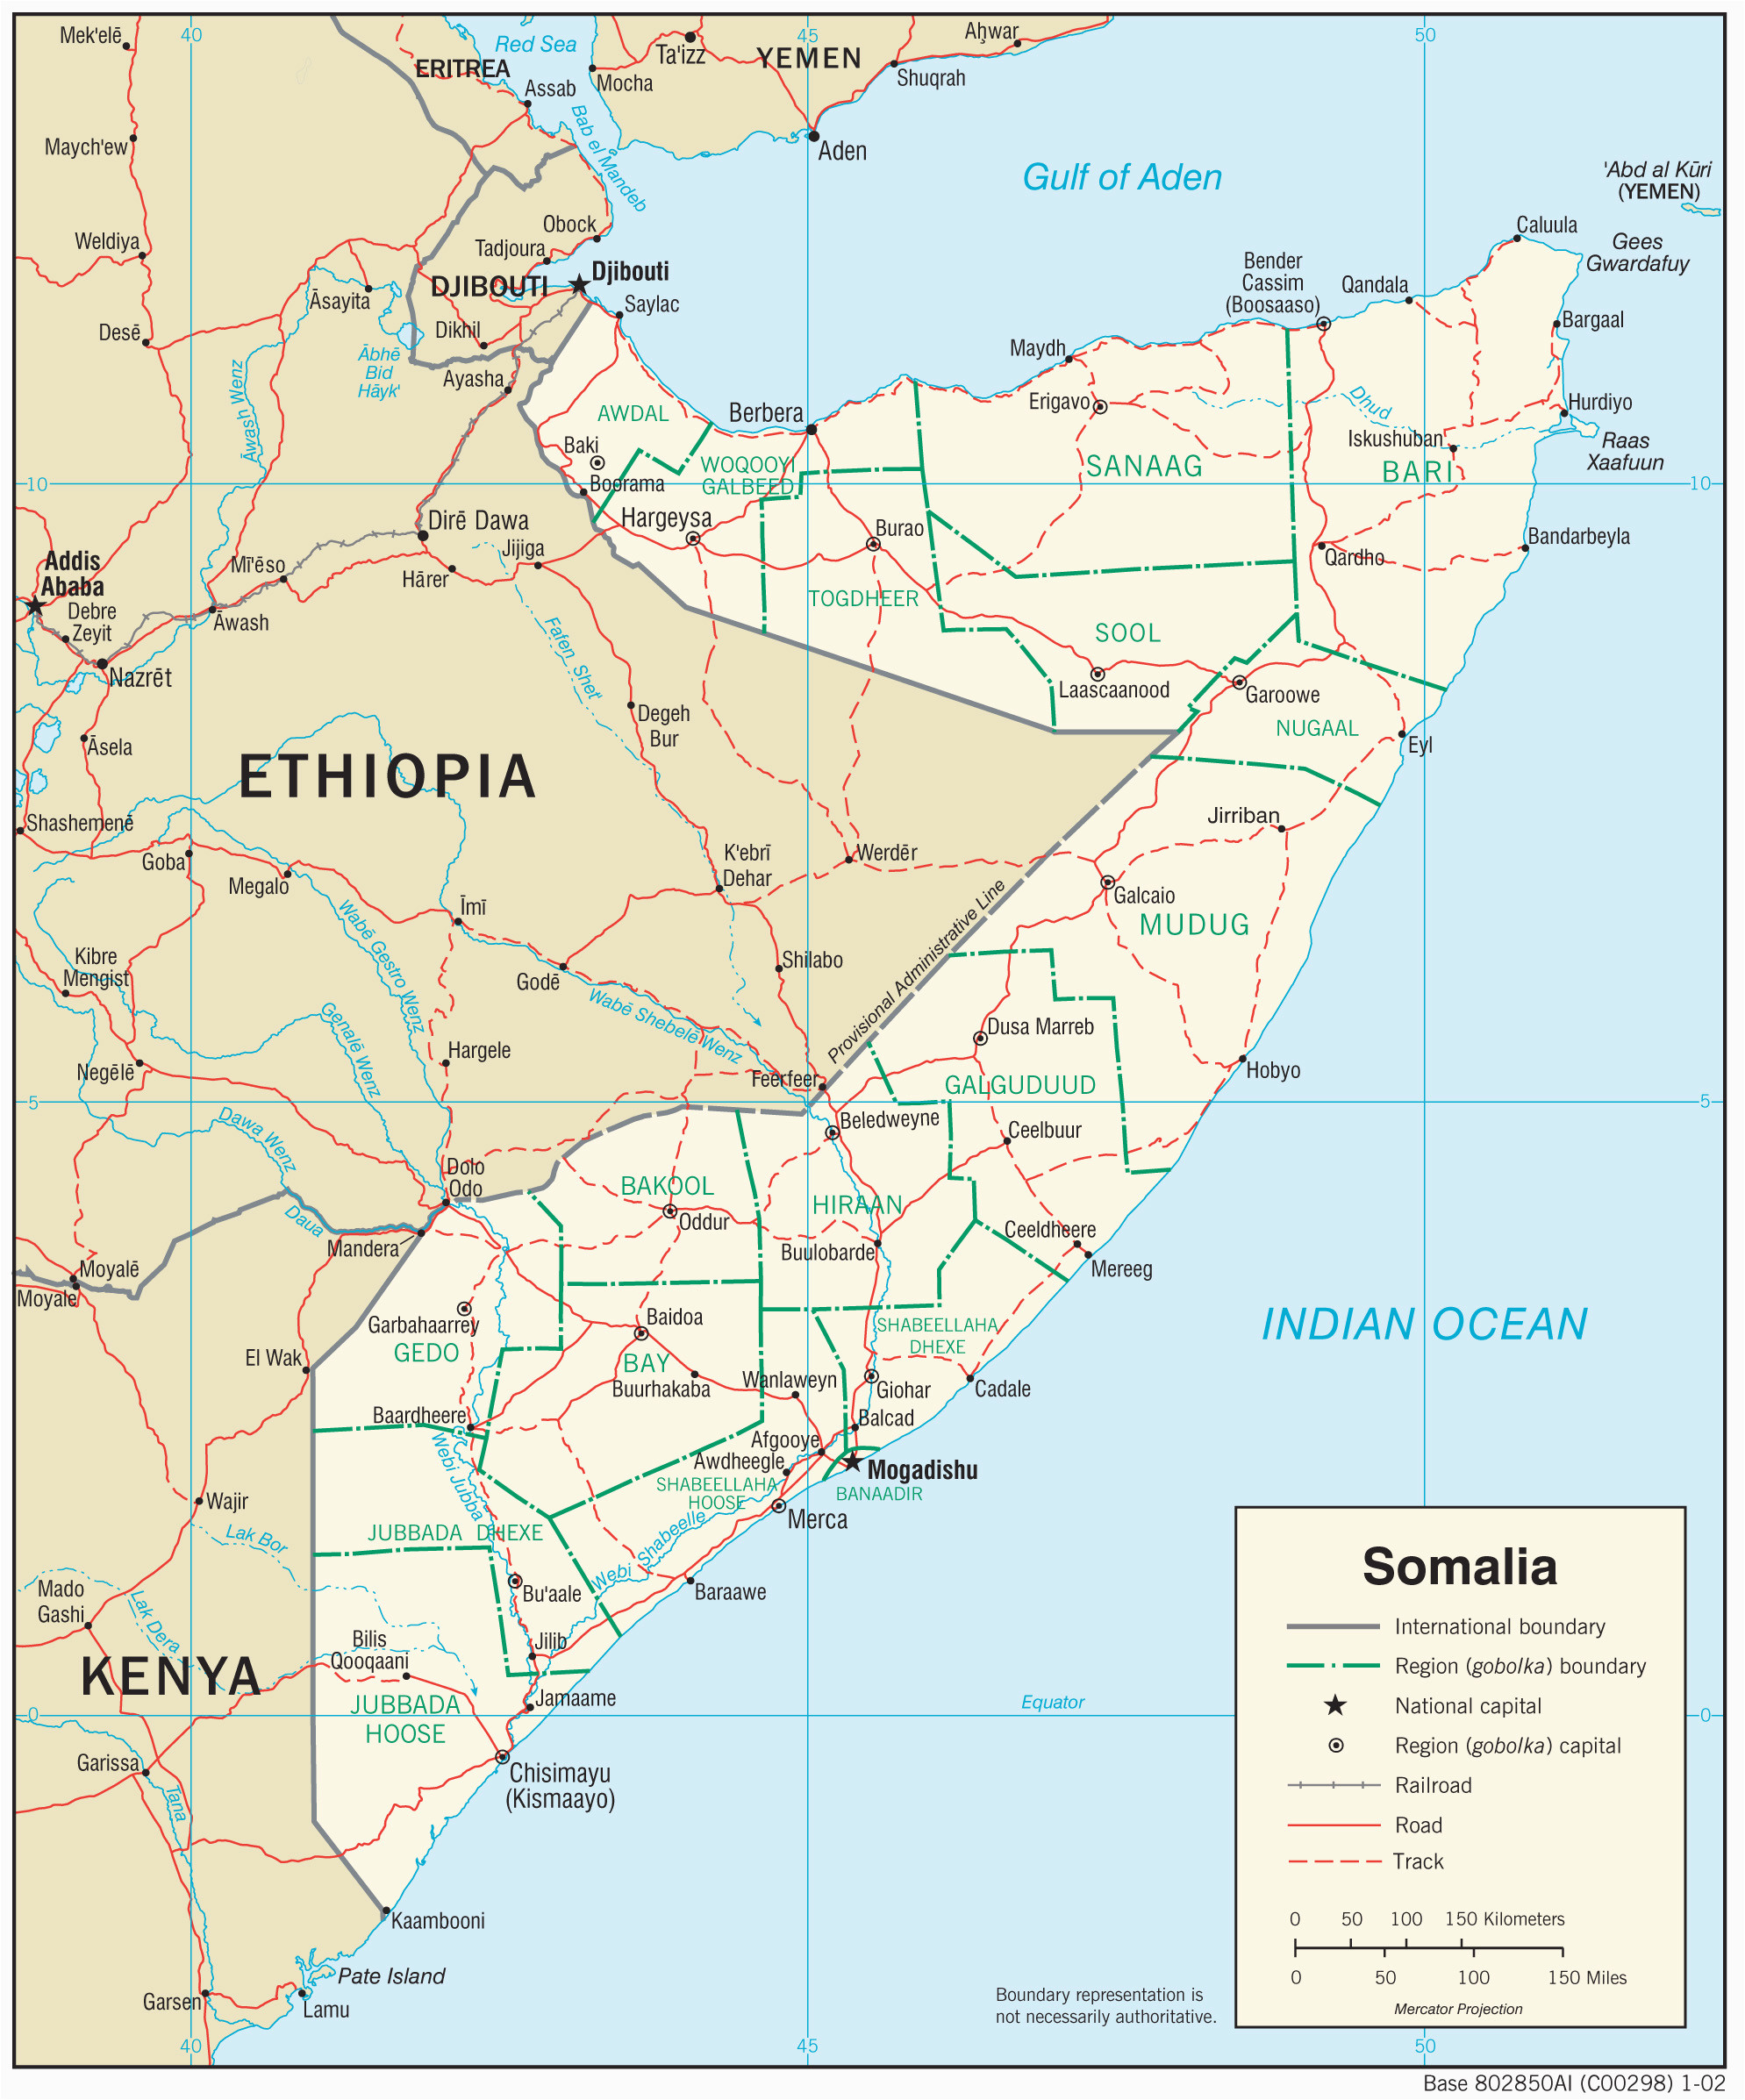 University Of Texas Library Maps somalia Maps Perry Castaa Eda Map Collection Ut Library Online